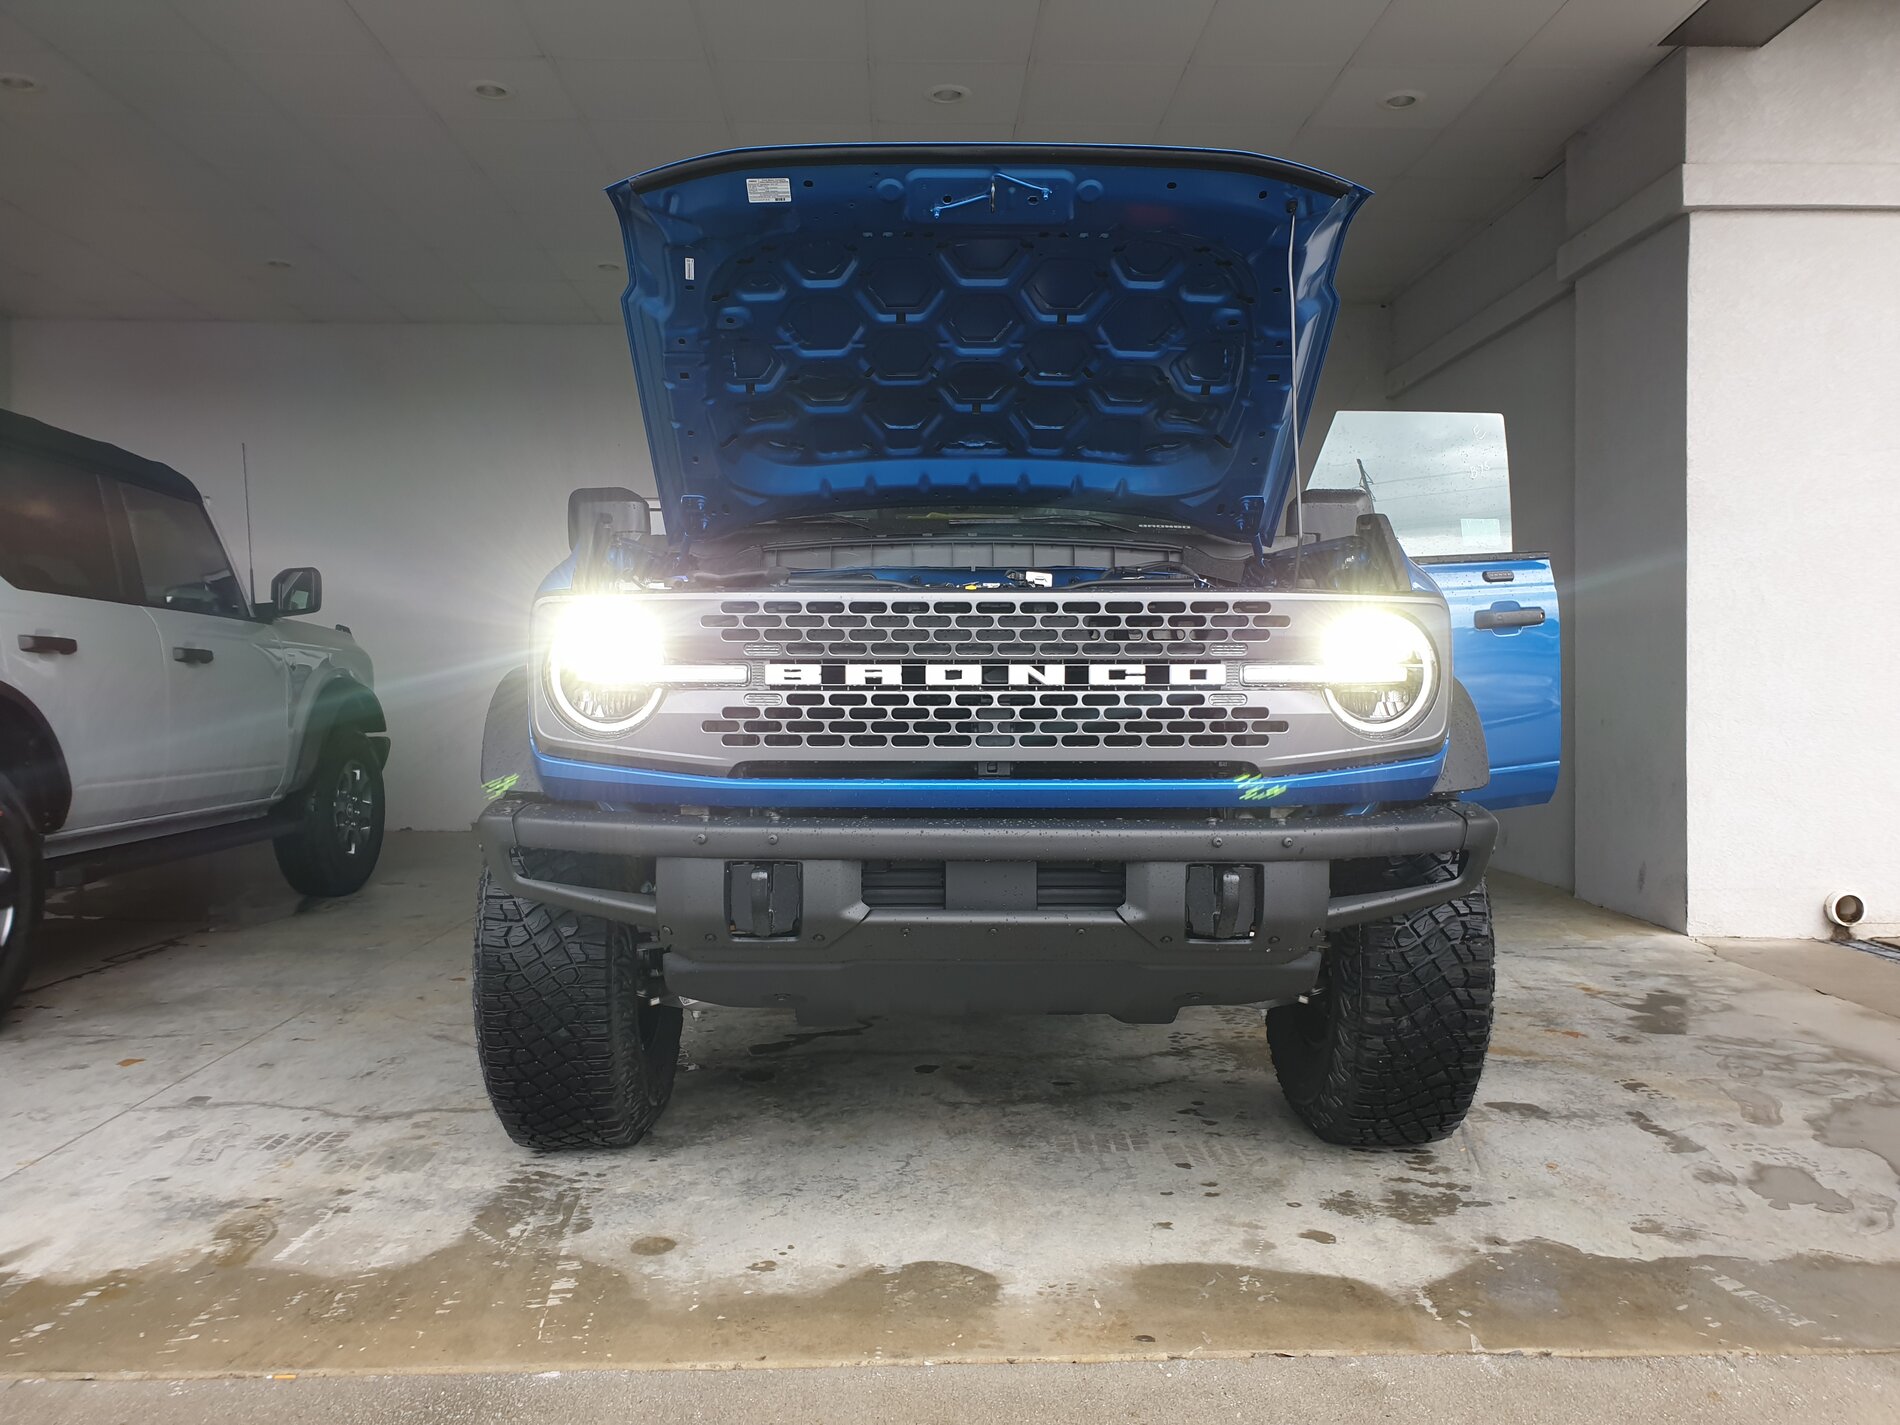 Ford Bronco First 24 hrs in my Badlands Sasquatch 4dr 2.7L Velocity Blue Soft Top (w/ Rear Cargo Enclosure review) 20210719_180048